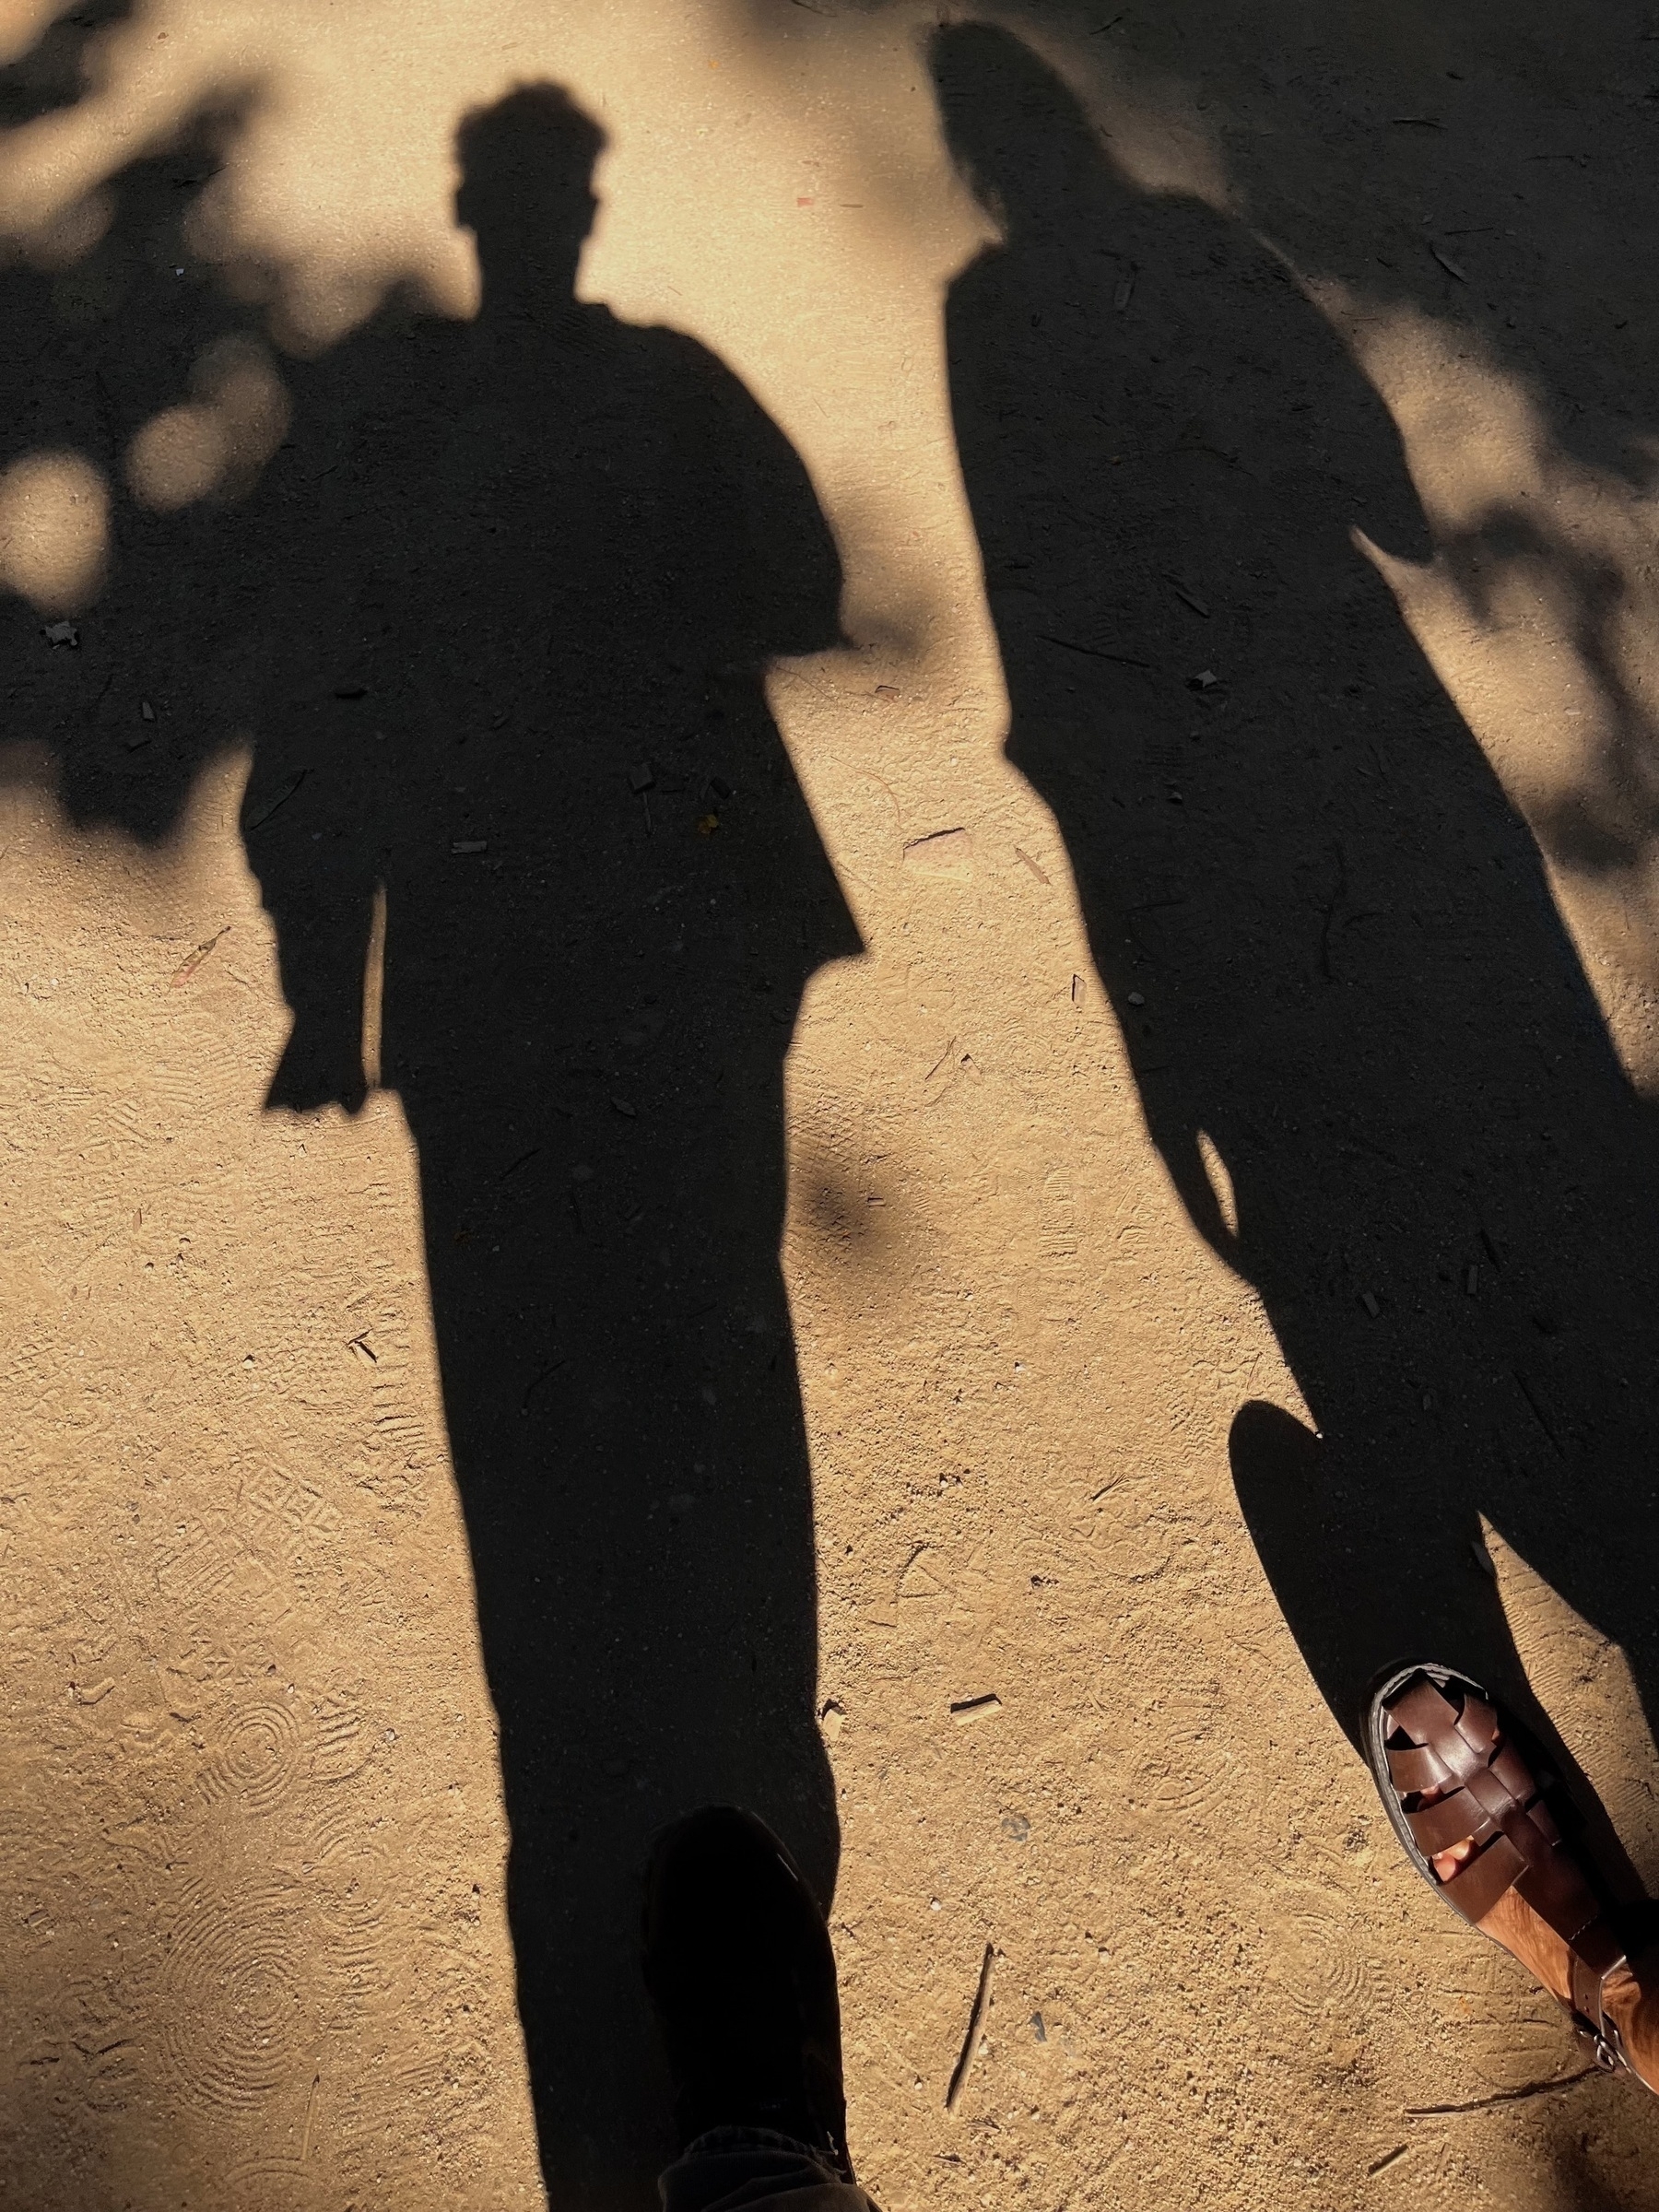 The shadow of two people walking on hard sandy coloured surface. A foot of each person is visible.